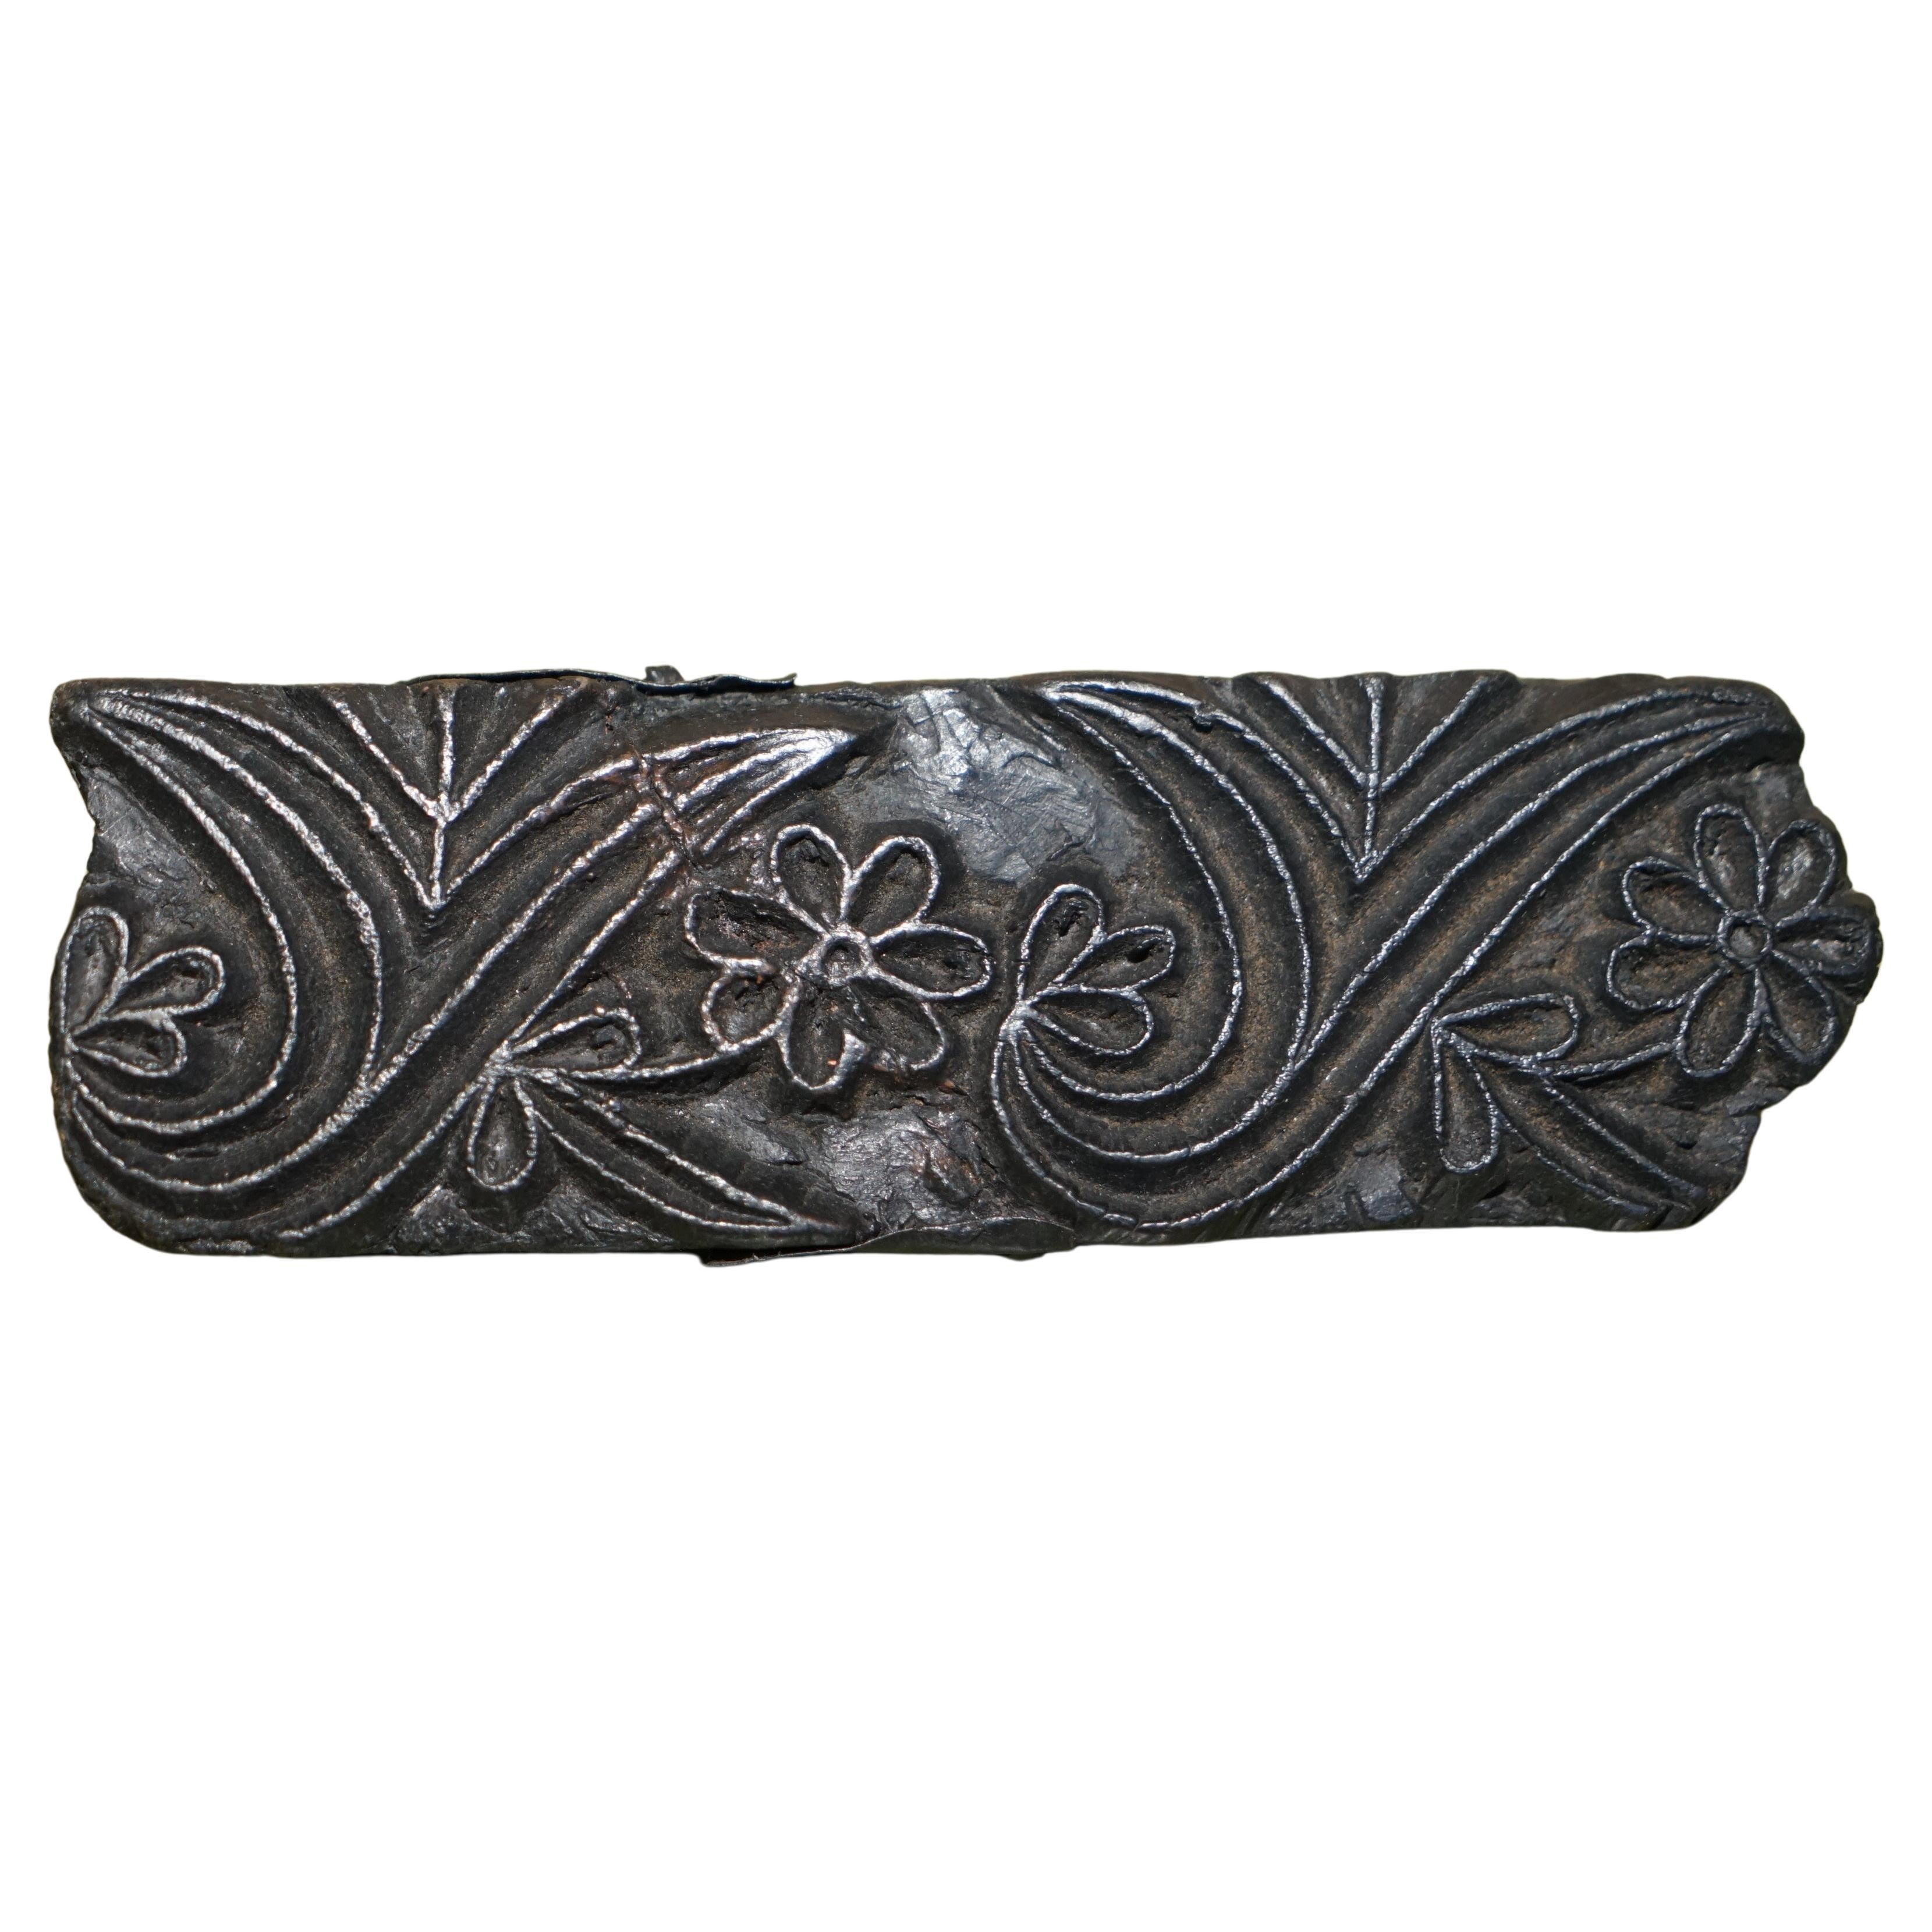 VERY COLLECTABLE ANTIQUE HAND CARVED SWiRLY BOARDER PRINTING BLOCK FOR WALLPAPER